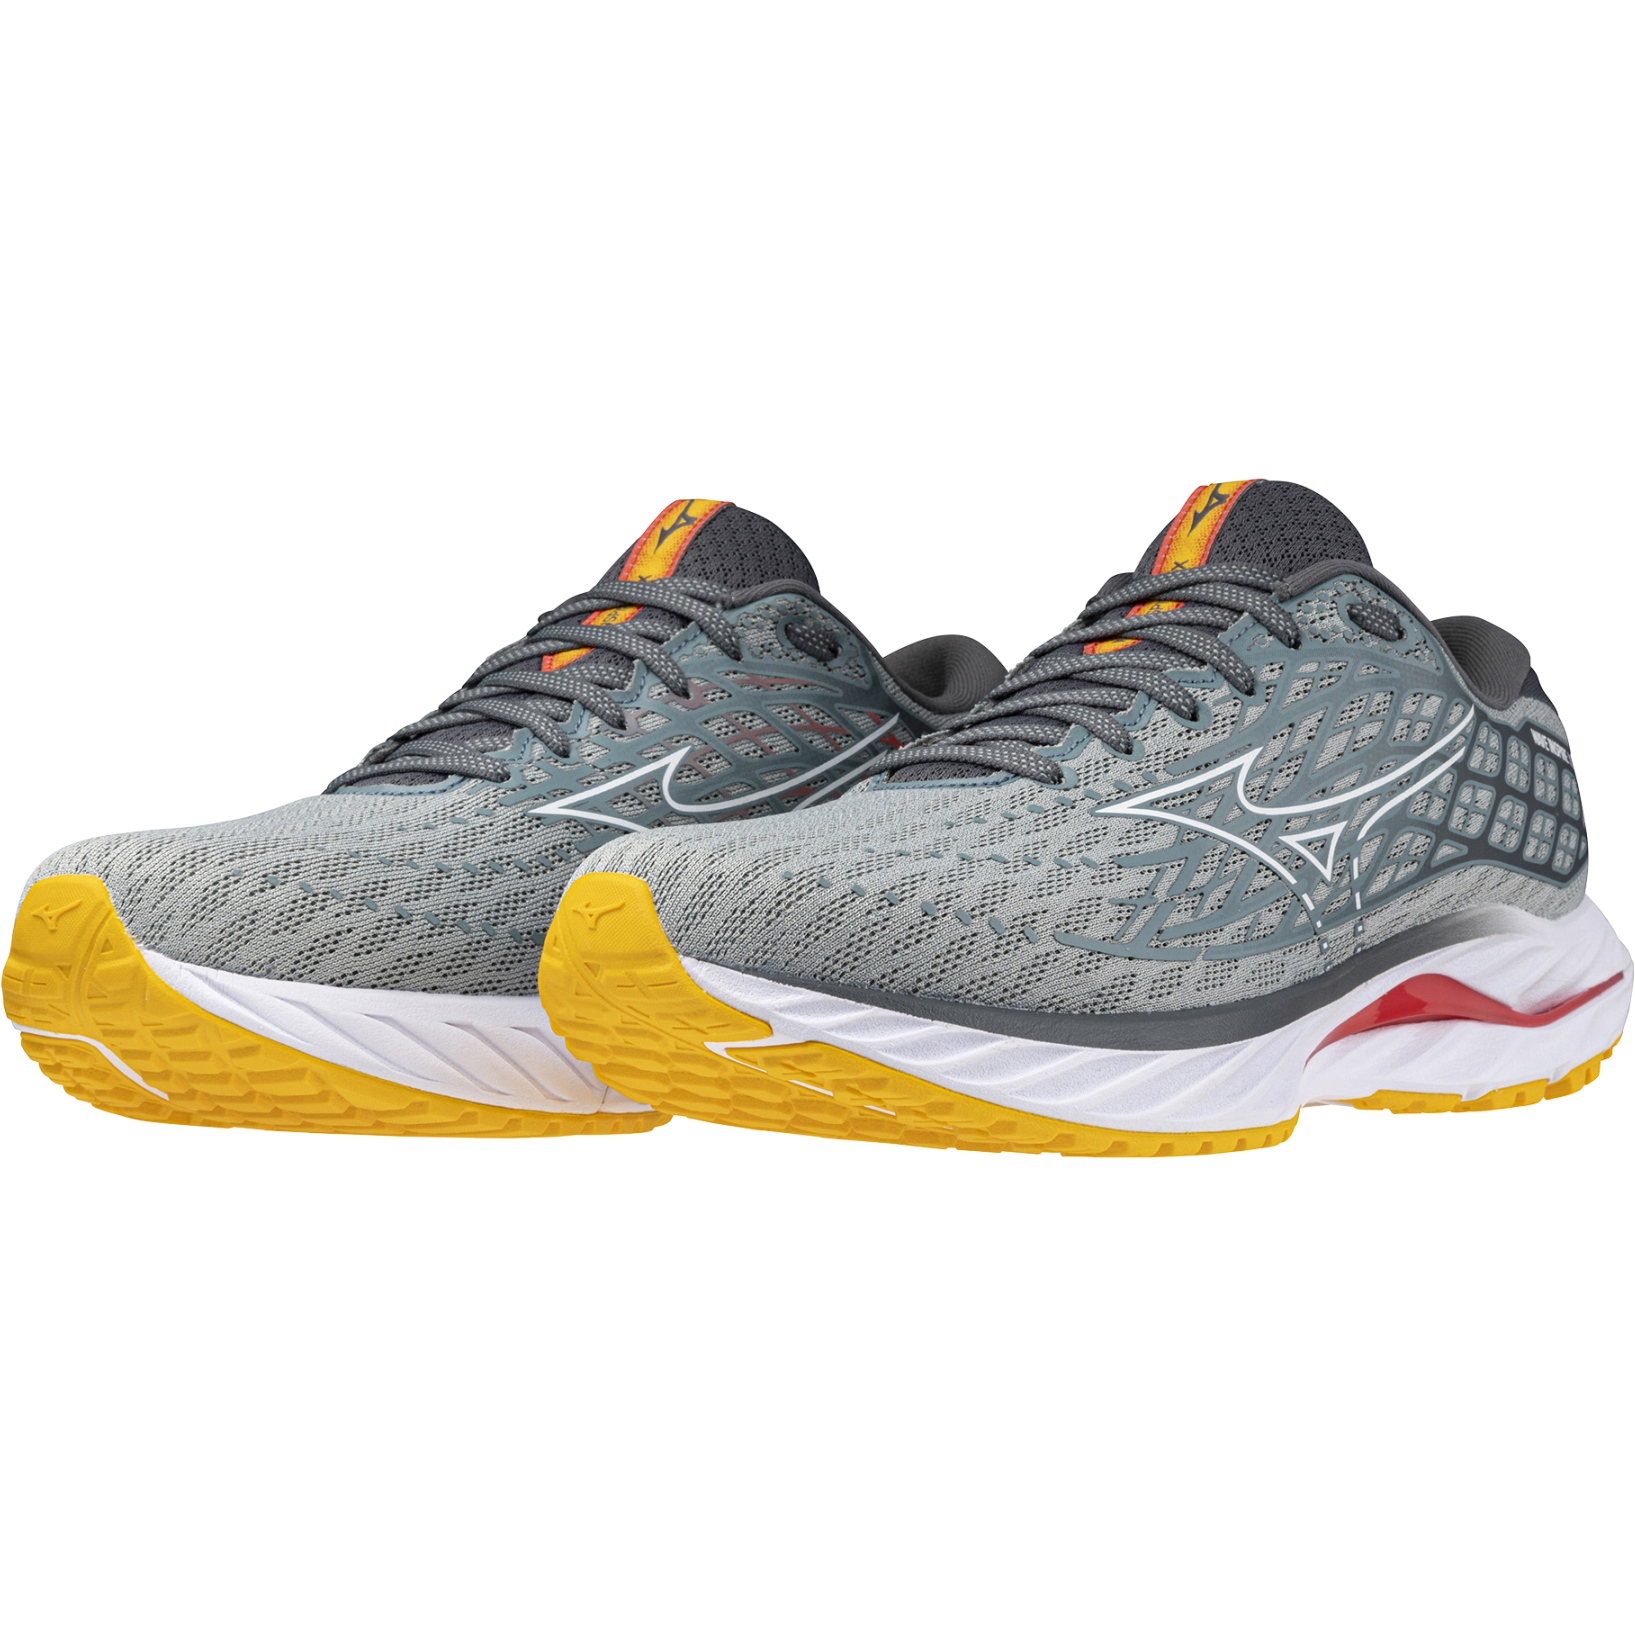 Picture of Mizuno Wave Inspire 20 Running Shoes Men - Abyss / White / Citrus